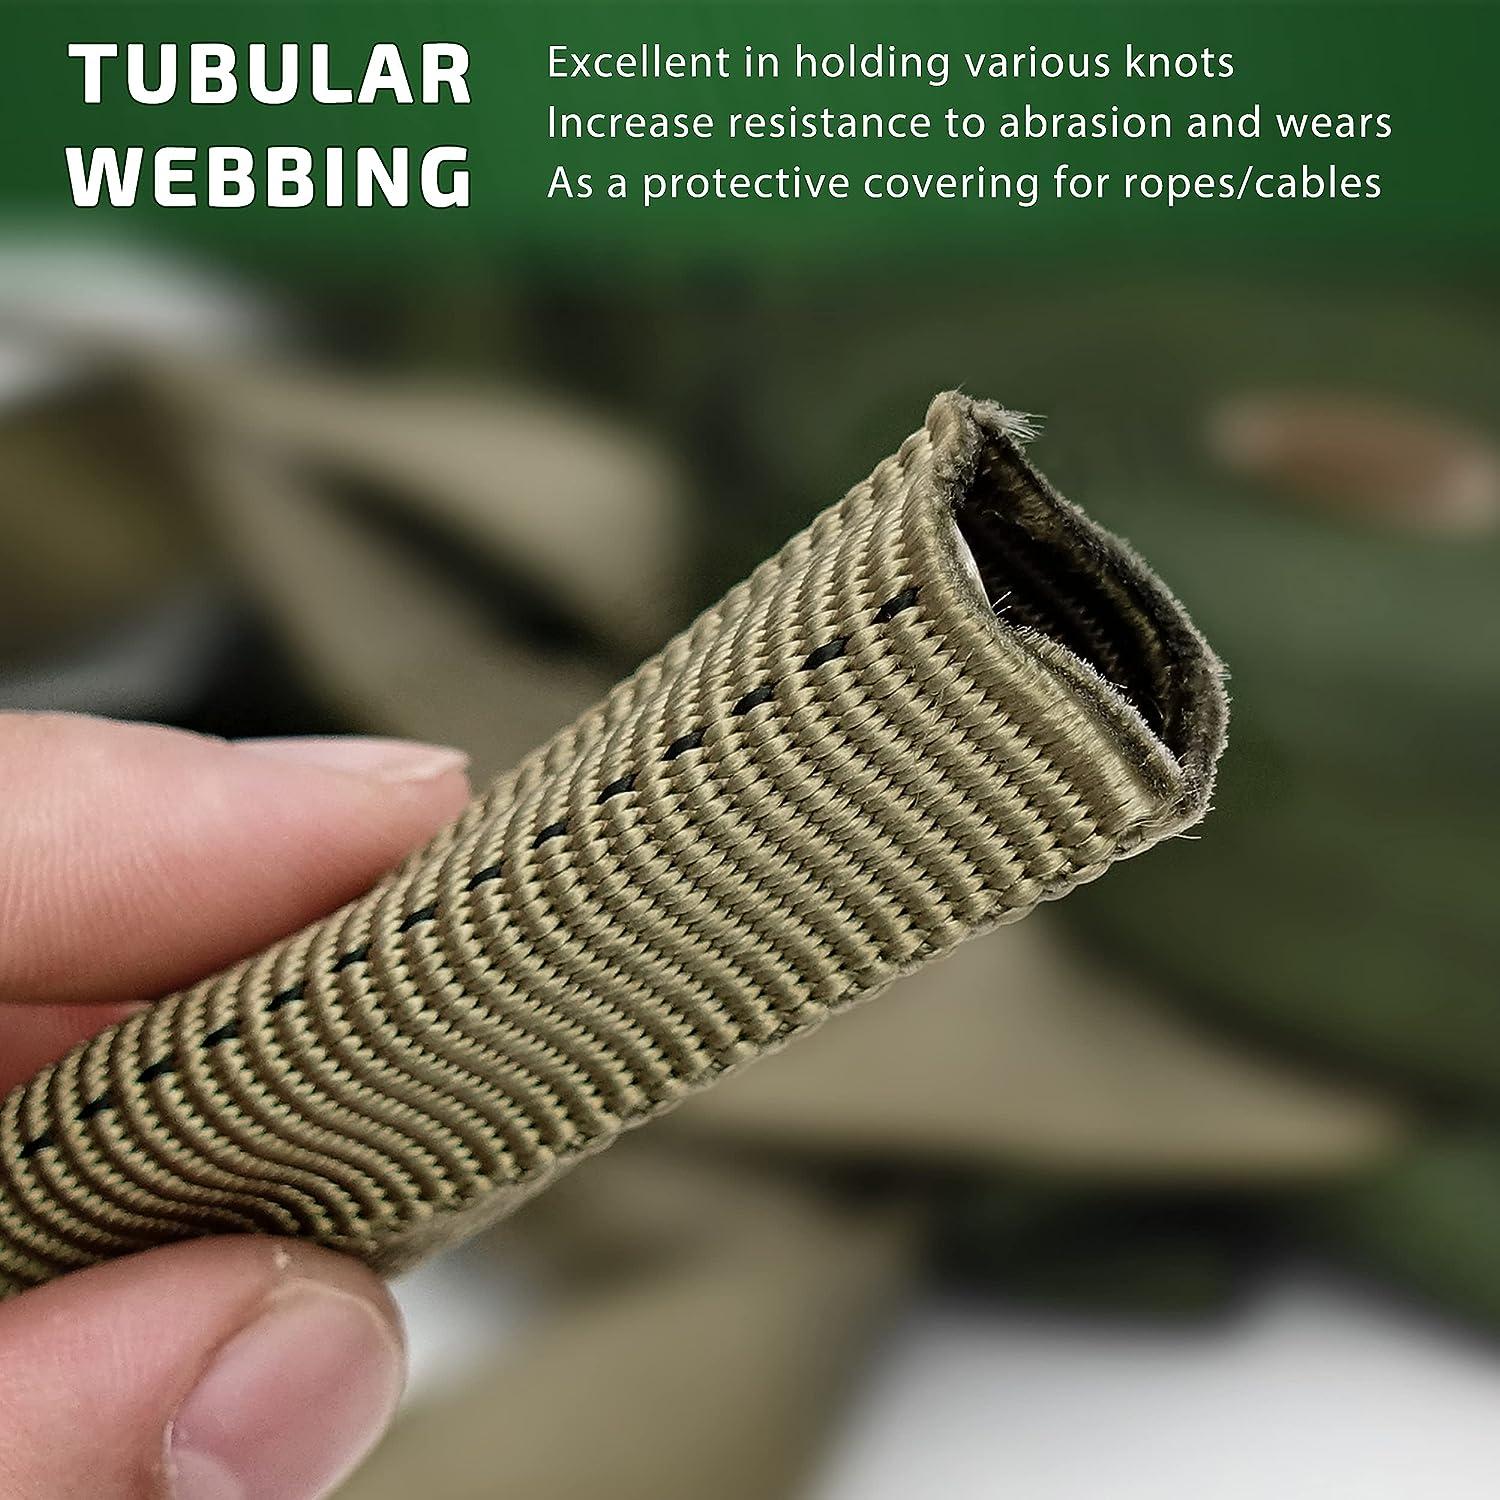  GM CLIMBING 1 inch MIL-W-5625 Nylon Tubular Webbing Milspecs  4000Lbs Durable for Outdoor Tactical Parachute Climbing Rescue Survival Tie  Down 1 inch x 30Ft / 10 Yards Camo Green 483 : Sports & Outdoors